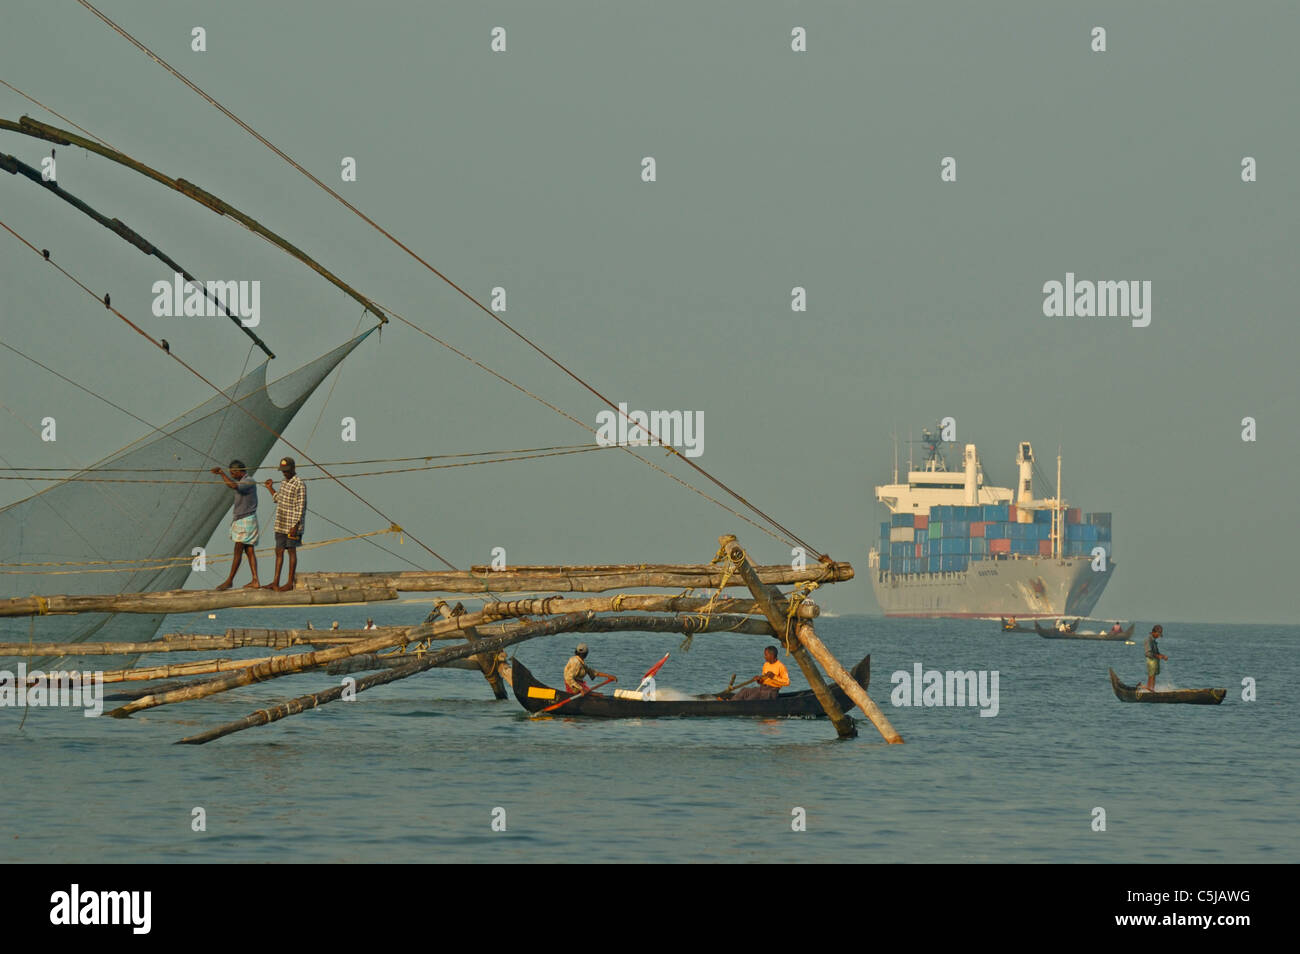 Indian fishermen working their old fashioned chinese style fishing nets in Fort Cochin (Fort Kochi), Cochin, Kerala 2005. In Stock Photo